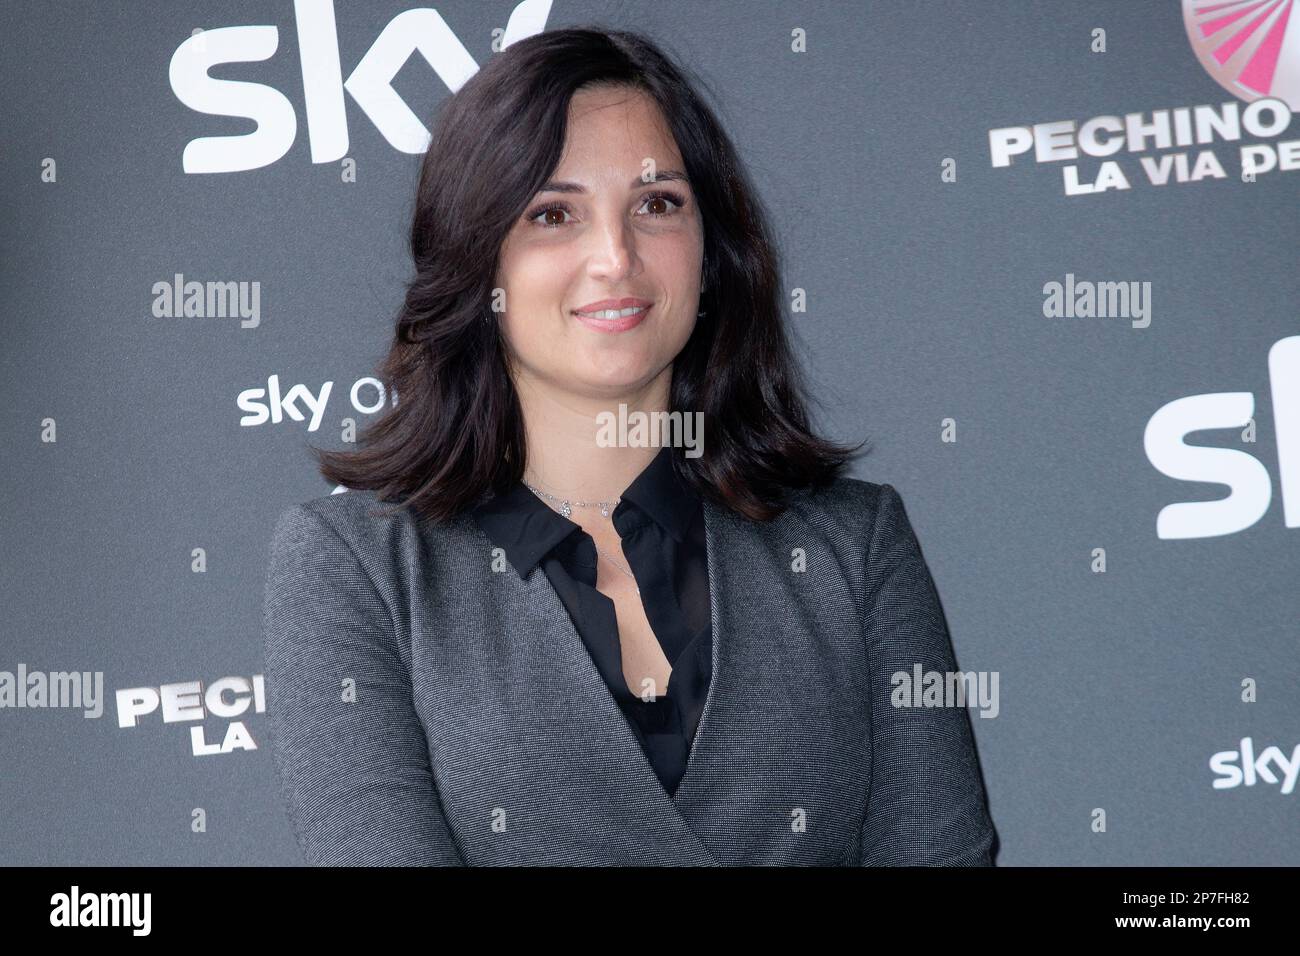 MILAN, ITALY - MARCH 06: Lara Picardi attends the photo-call for 'Pechino Express La via delle Indie' Sky Original on March 06, 2023 in Milan, Italy. Stock Photo